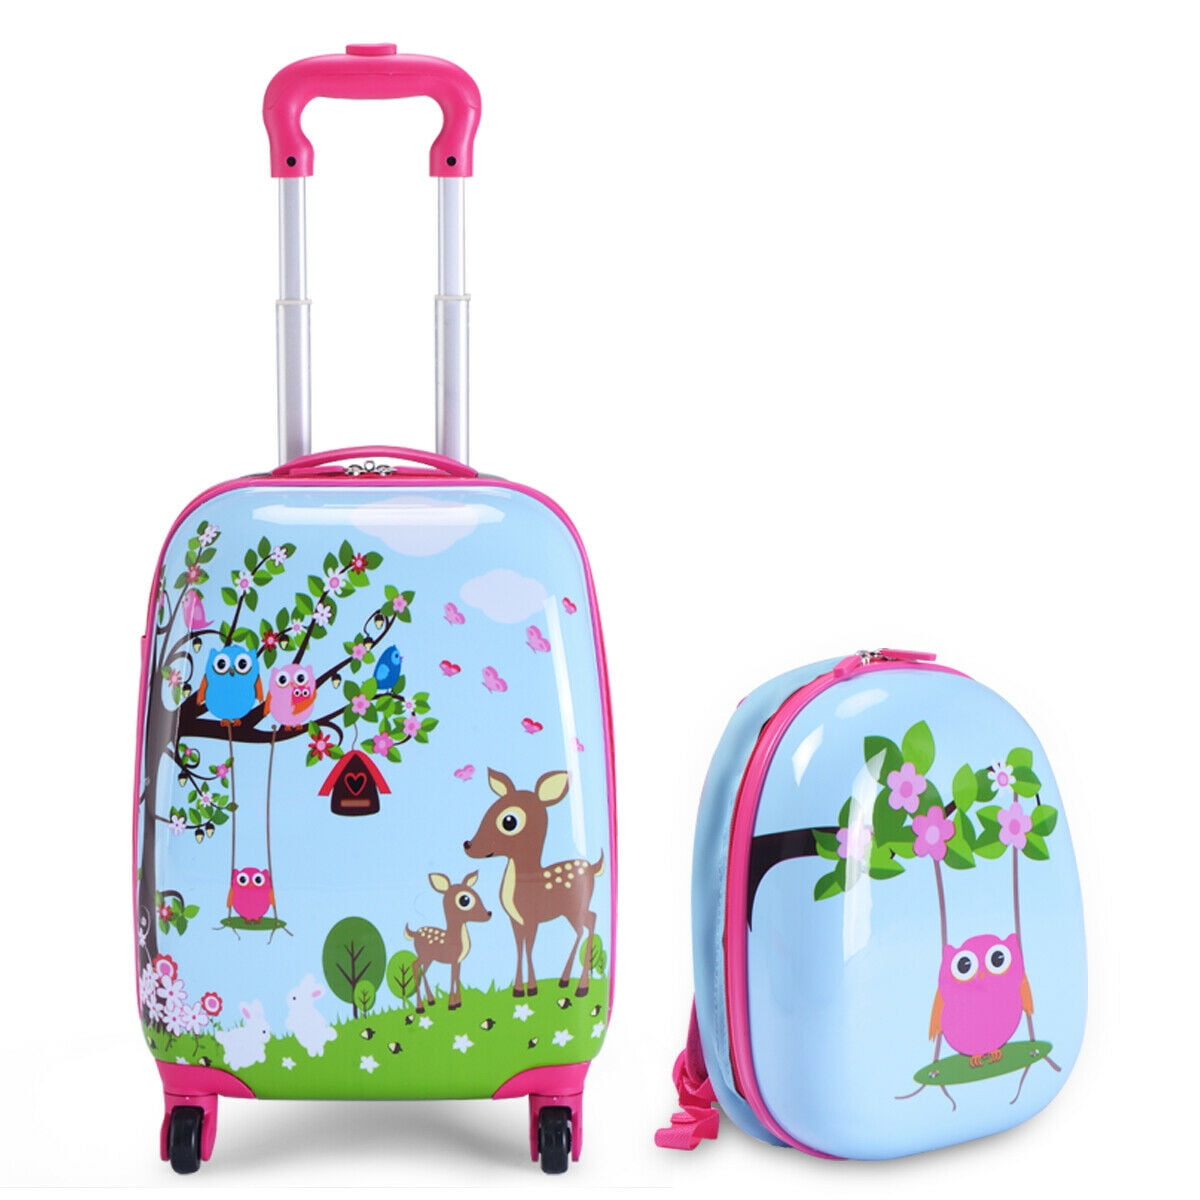 N-A AO Wei La OW Kids Ride-On Suitcase Carry-On Tollder Luggage with Wheels Suitcase to Kids Aged 1-6 Years Old (Blue, 20 inch) Nice